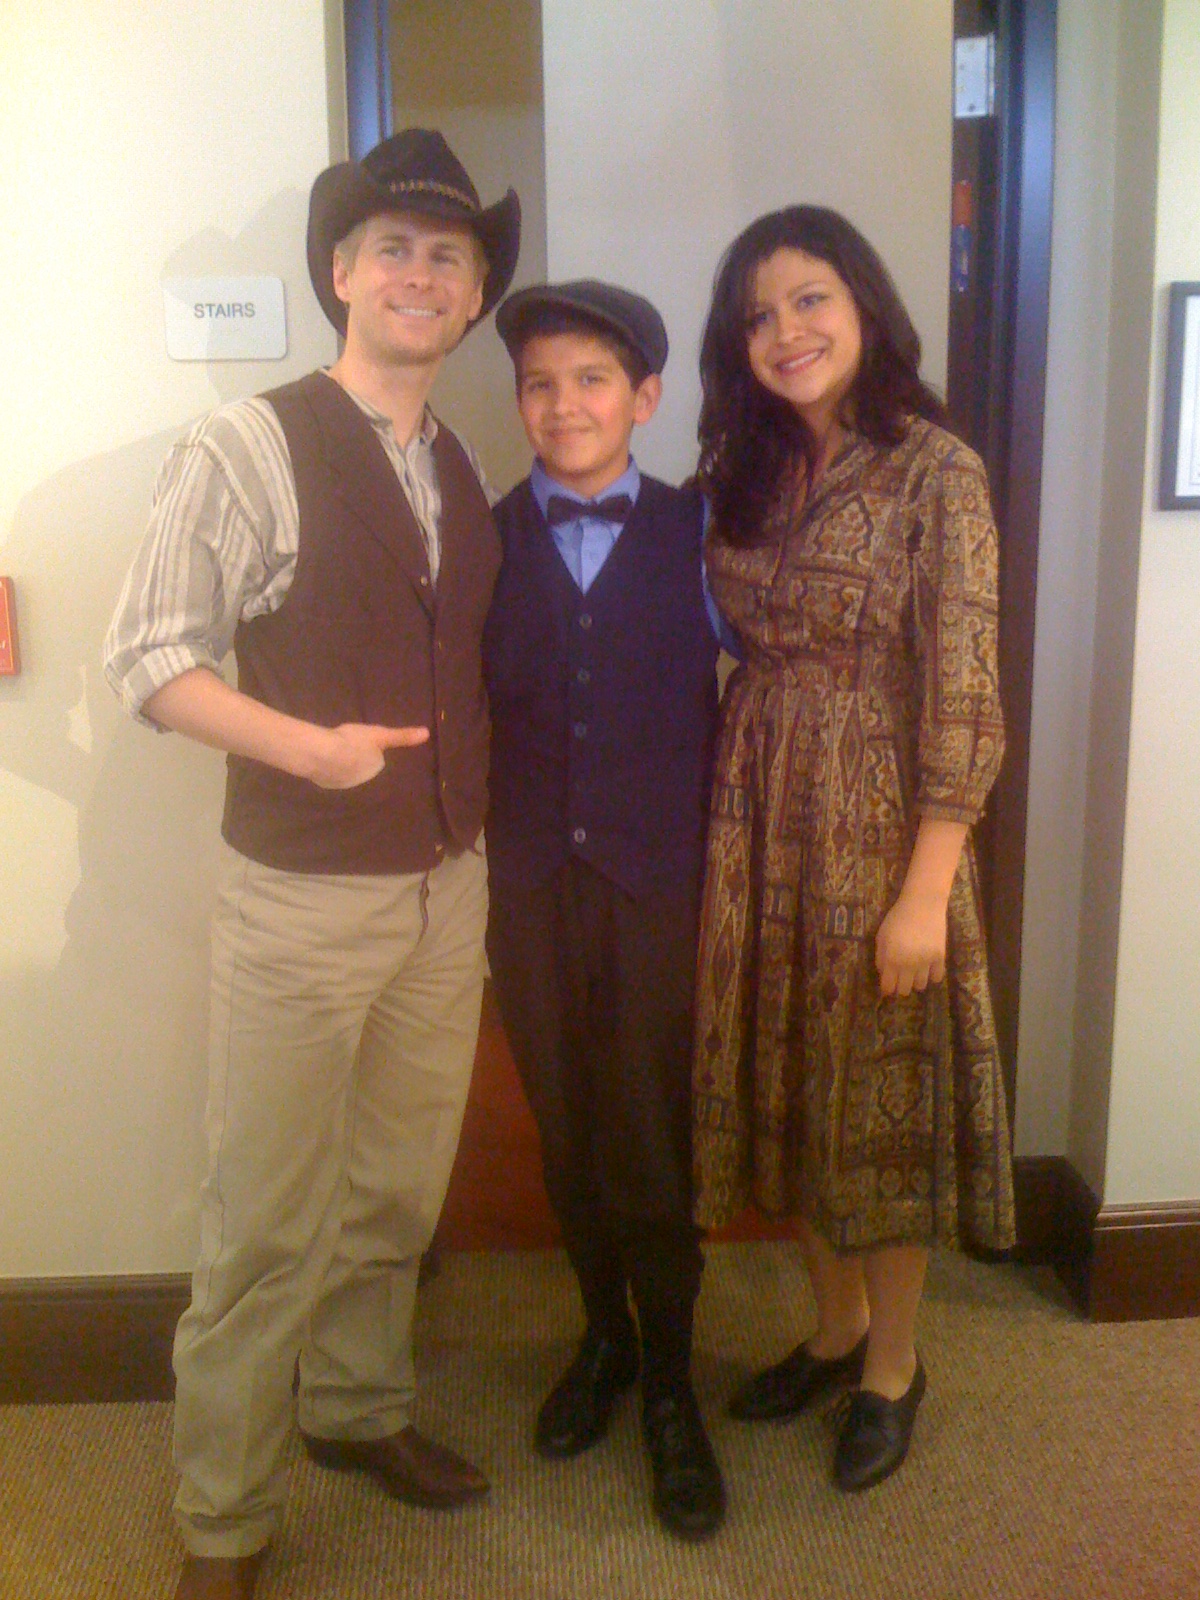 Tryston Skye with Elijah DeJesus (Pearl) and Sean Cain (Scottie)in the green room on the set of 